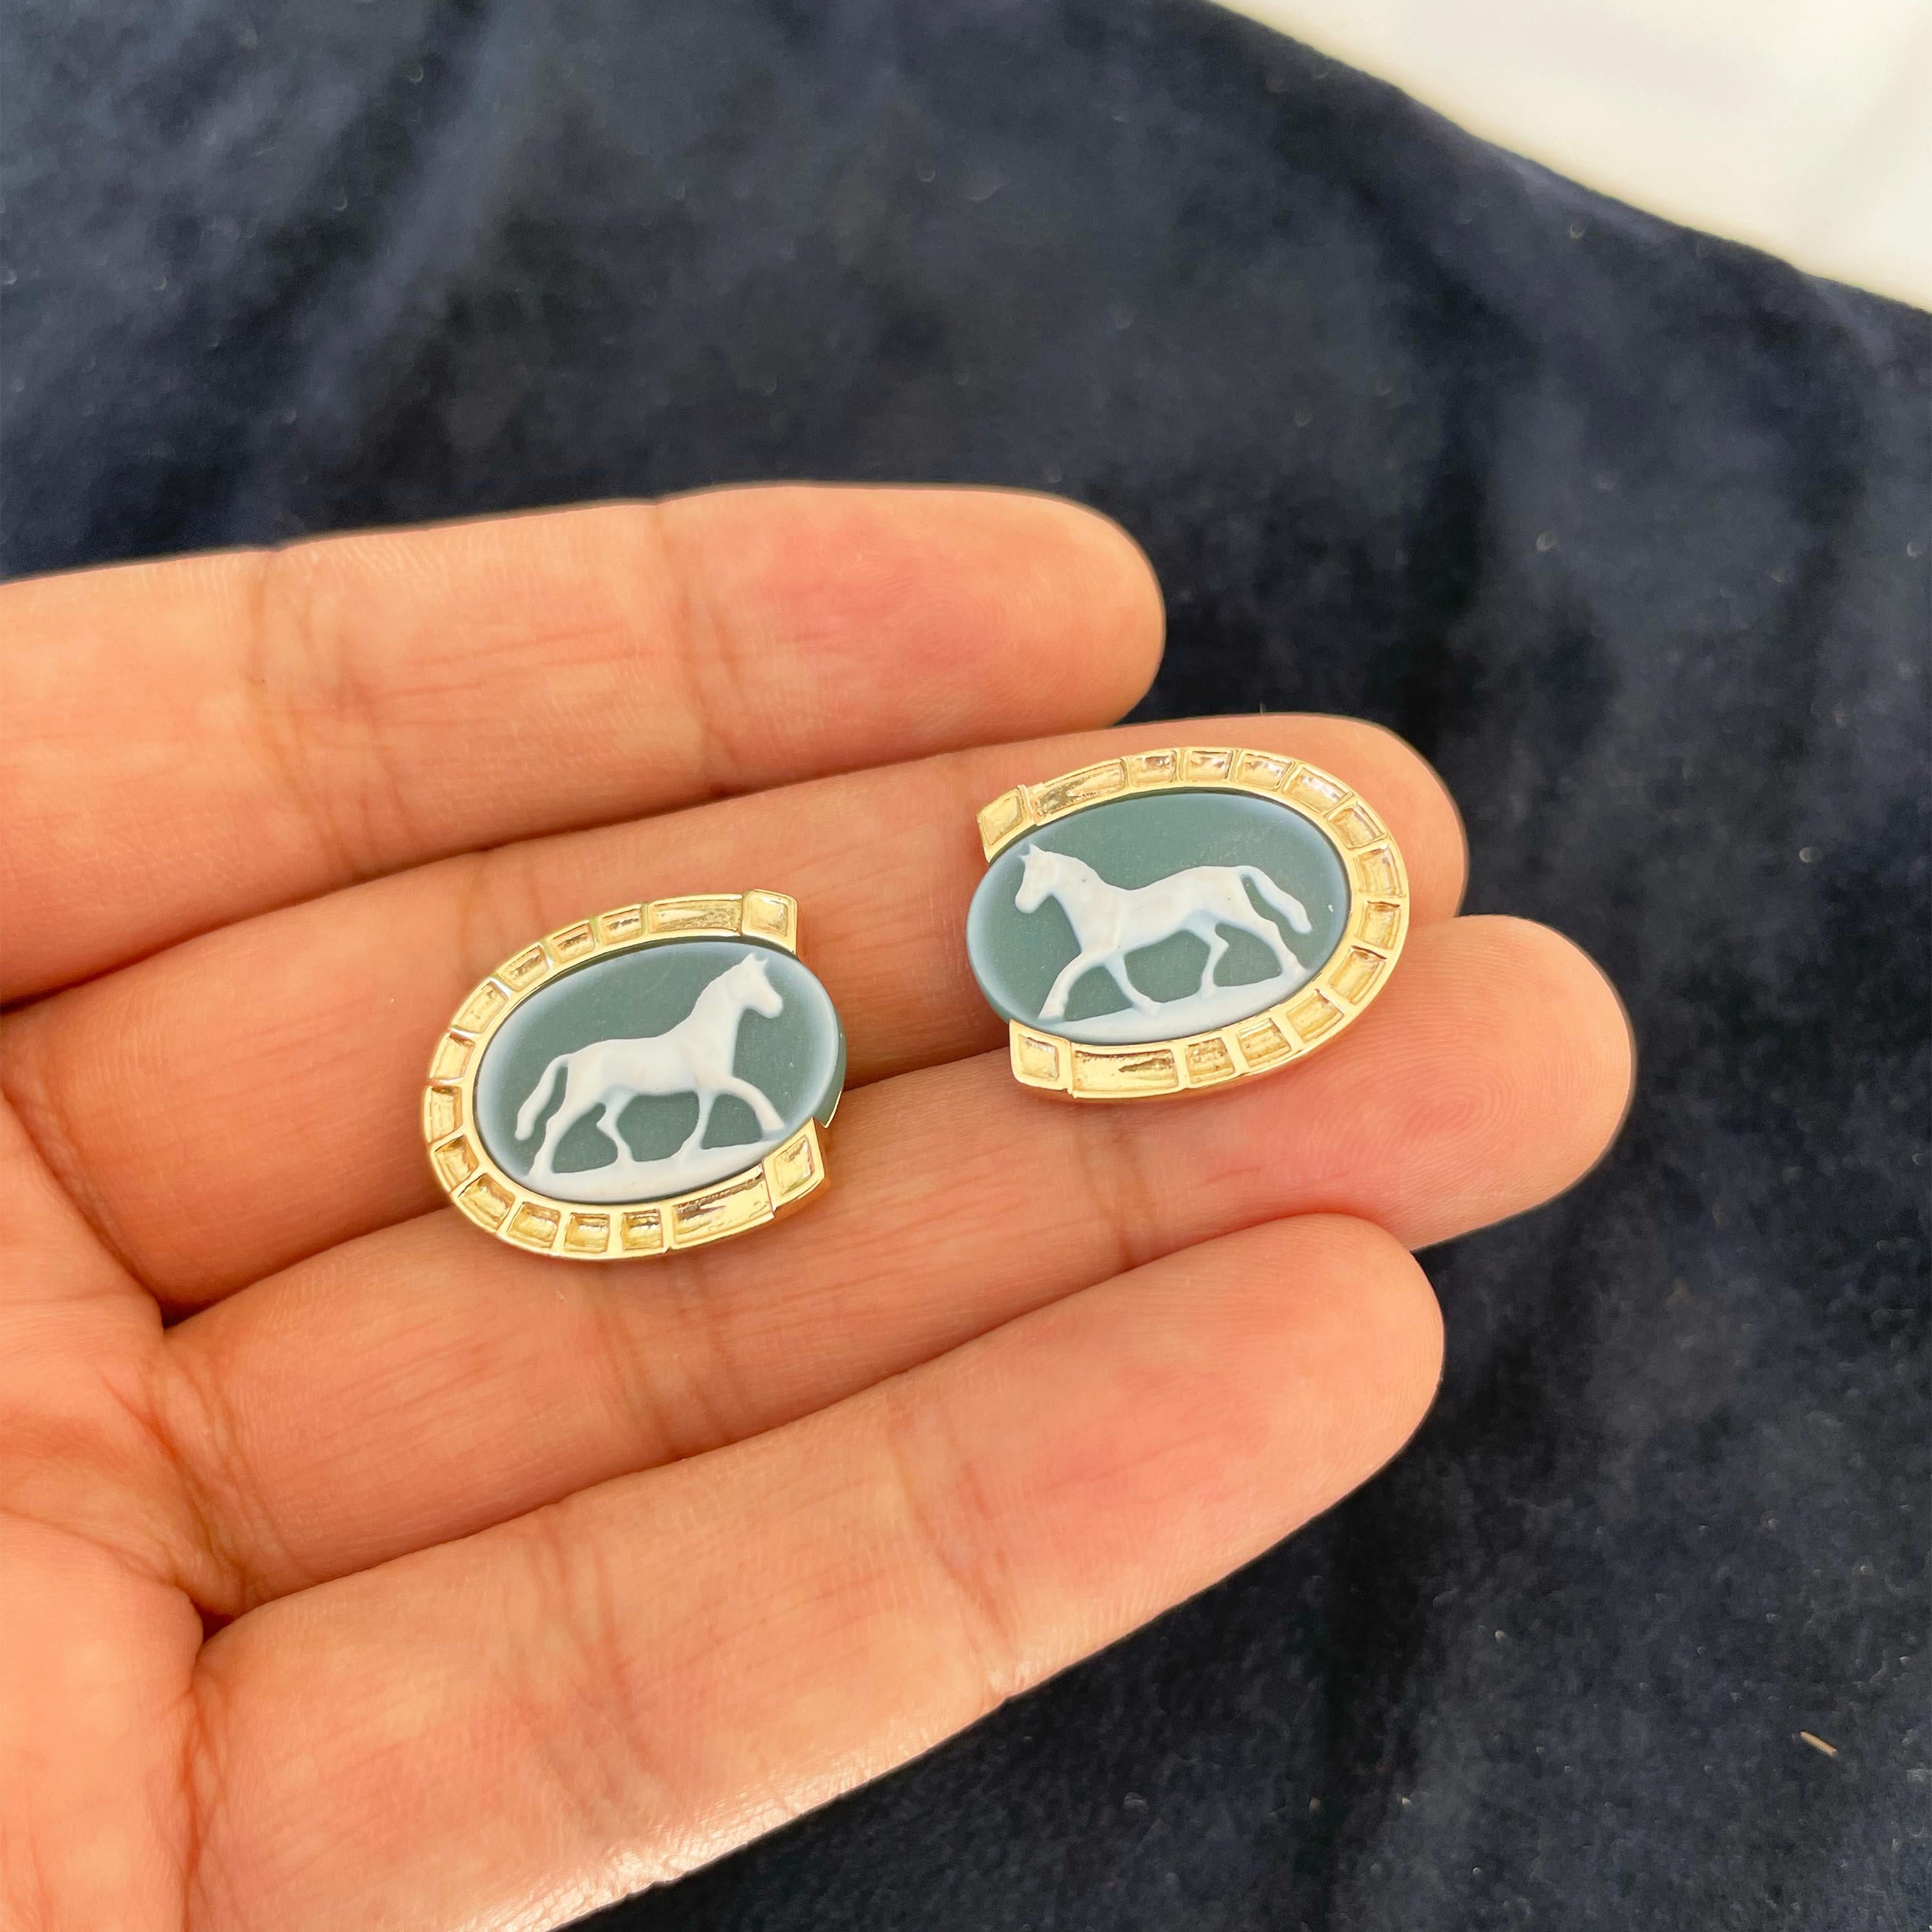 Reversible 14 karat gold horse carving cameo horse-shoe onyx cufflinks.

These exquisite pair of contemporary horse agate cameo carved cufflinks with horse shoe collet in 14 karat gold is a delight for the wearer! Hand-carved in the relief of a